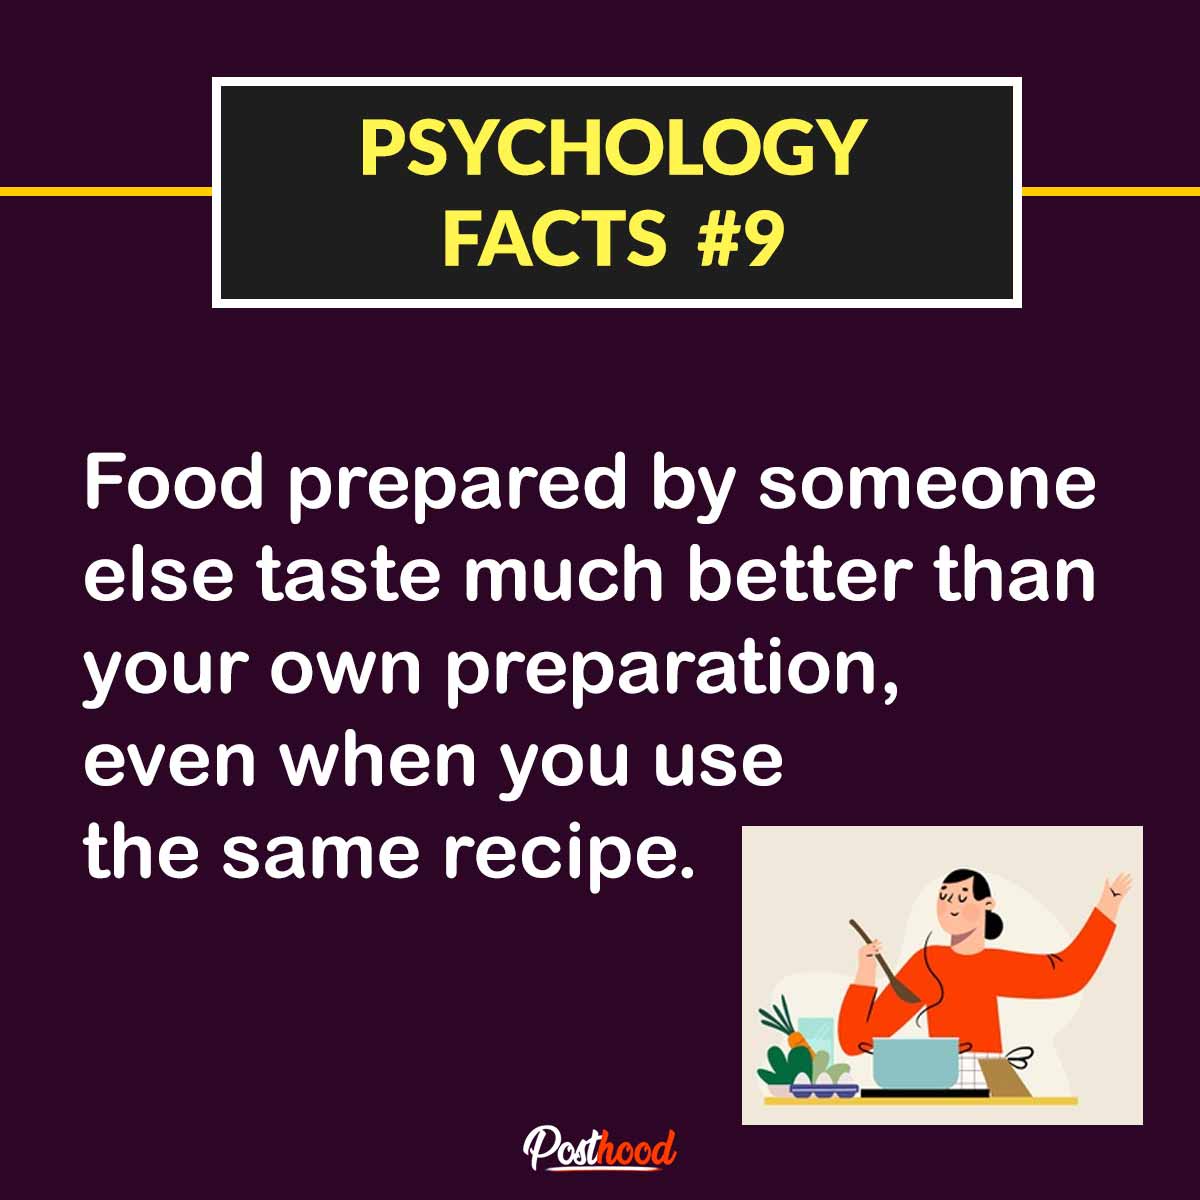 100 most interesting Psychology facts for students. Learn to know people more with these cool psychological facts about the human mind and behavior. 